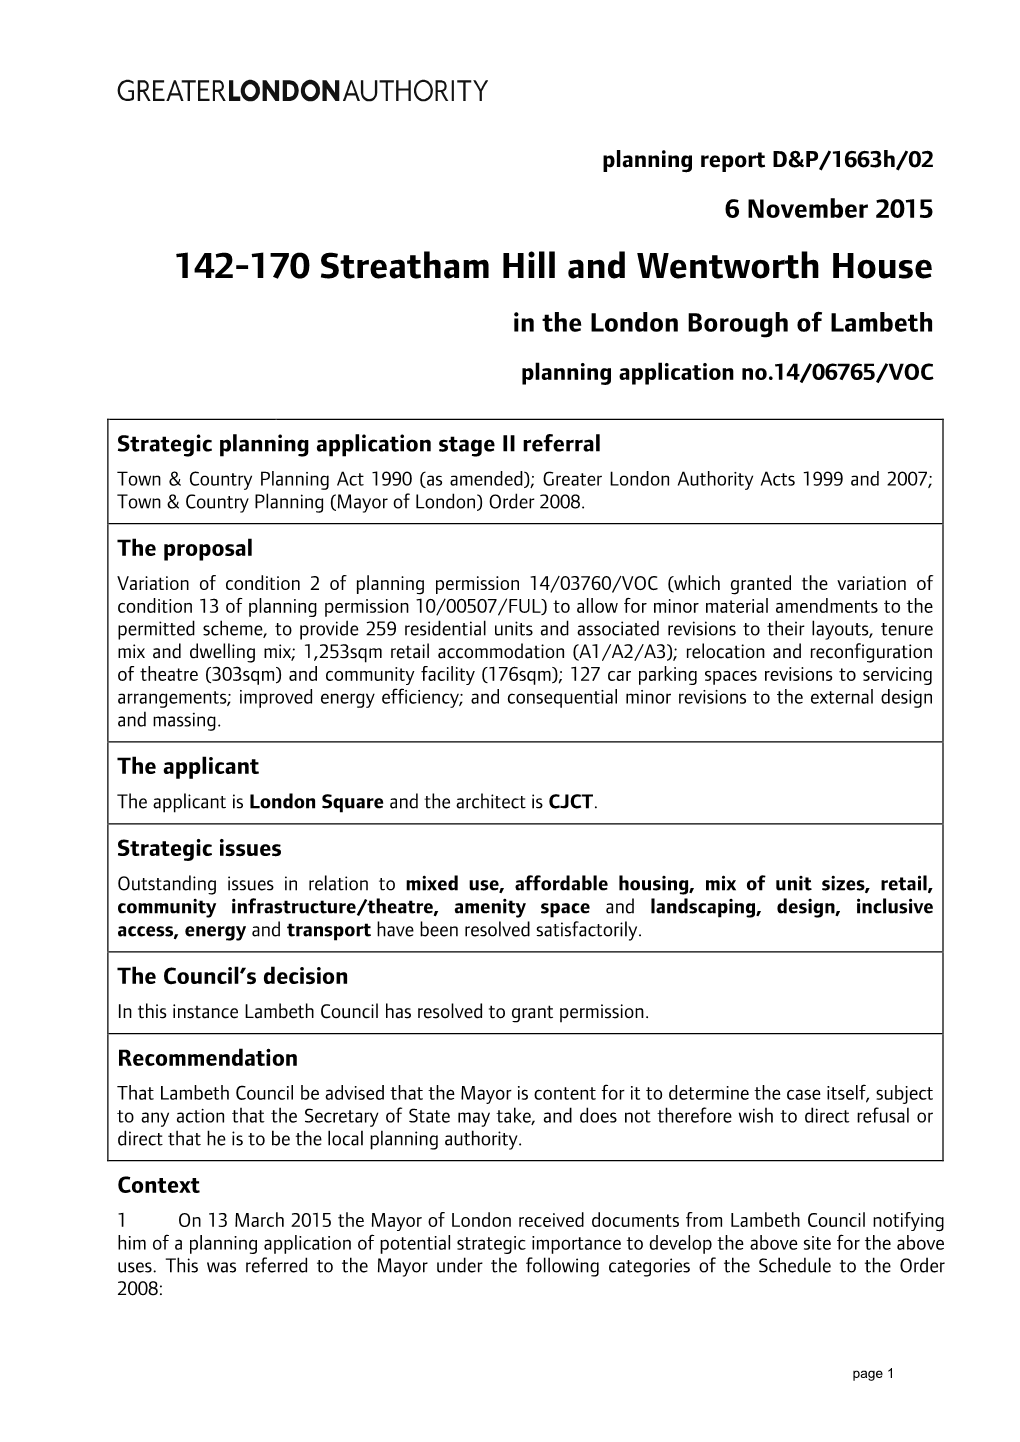 142-170 Streatham Hill and Wentworth House in the London Borough of Lambeth Planning Application No.14/06765/VOC